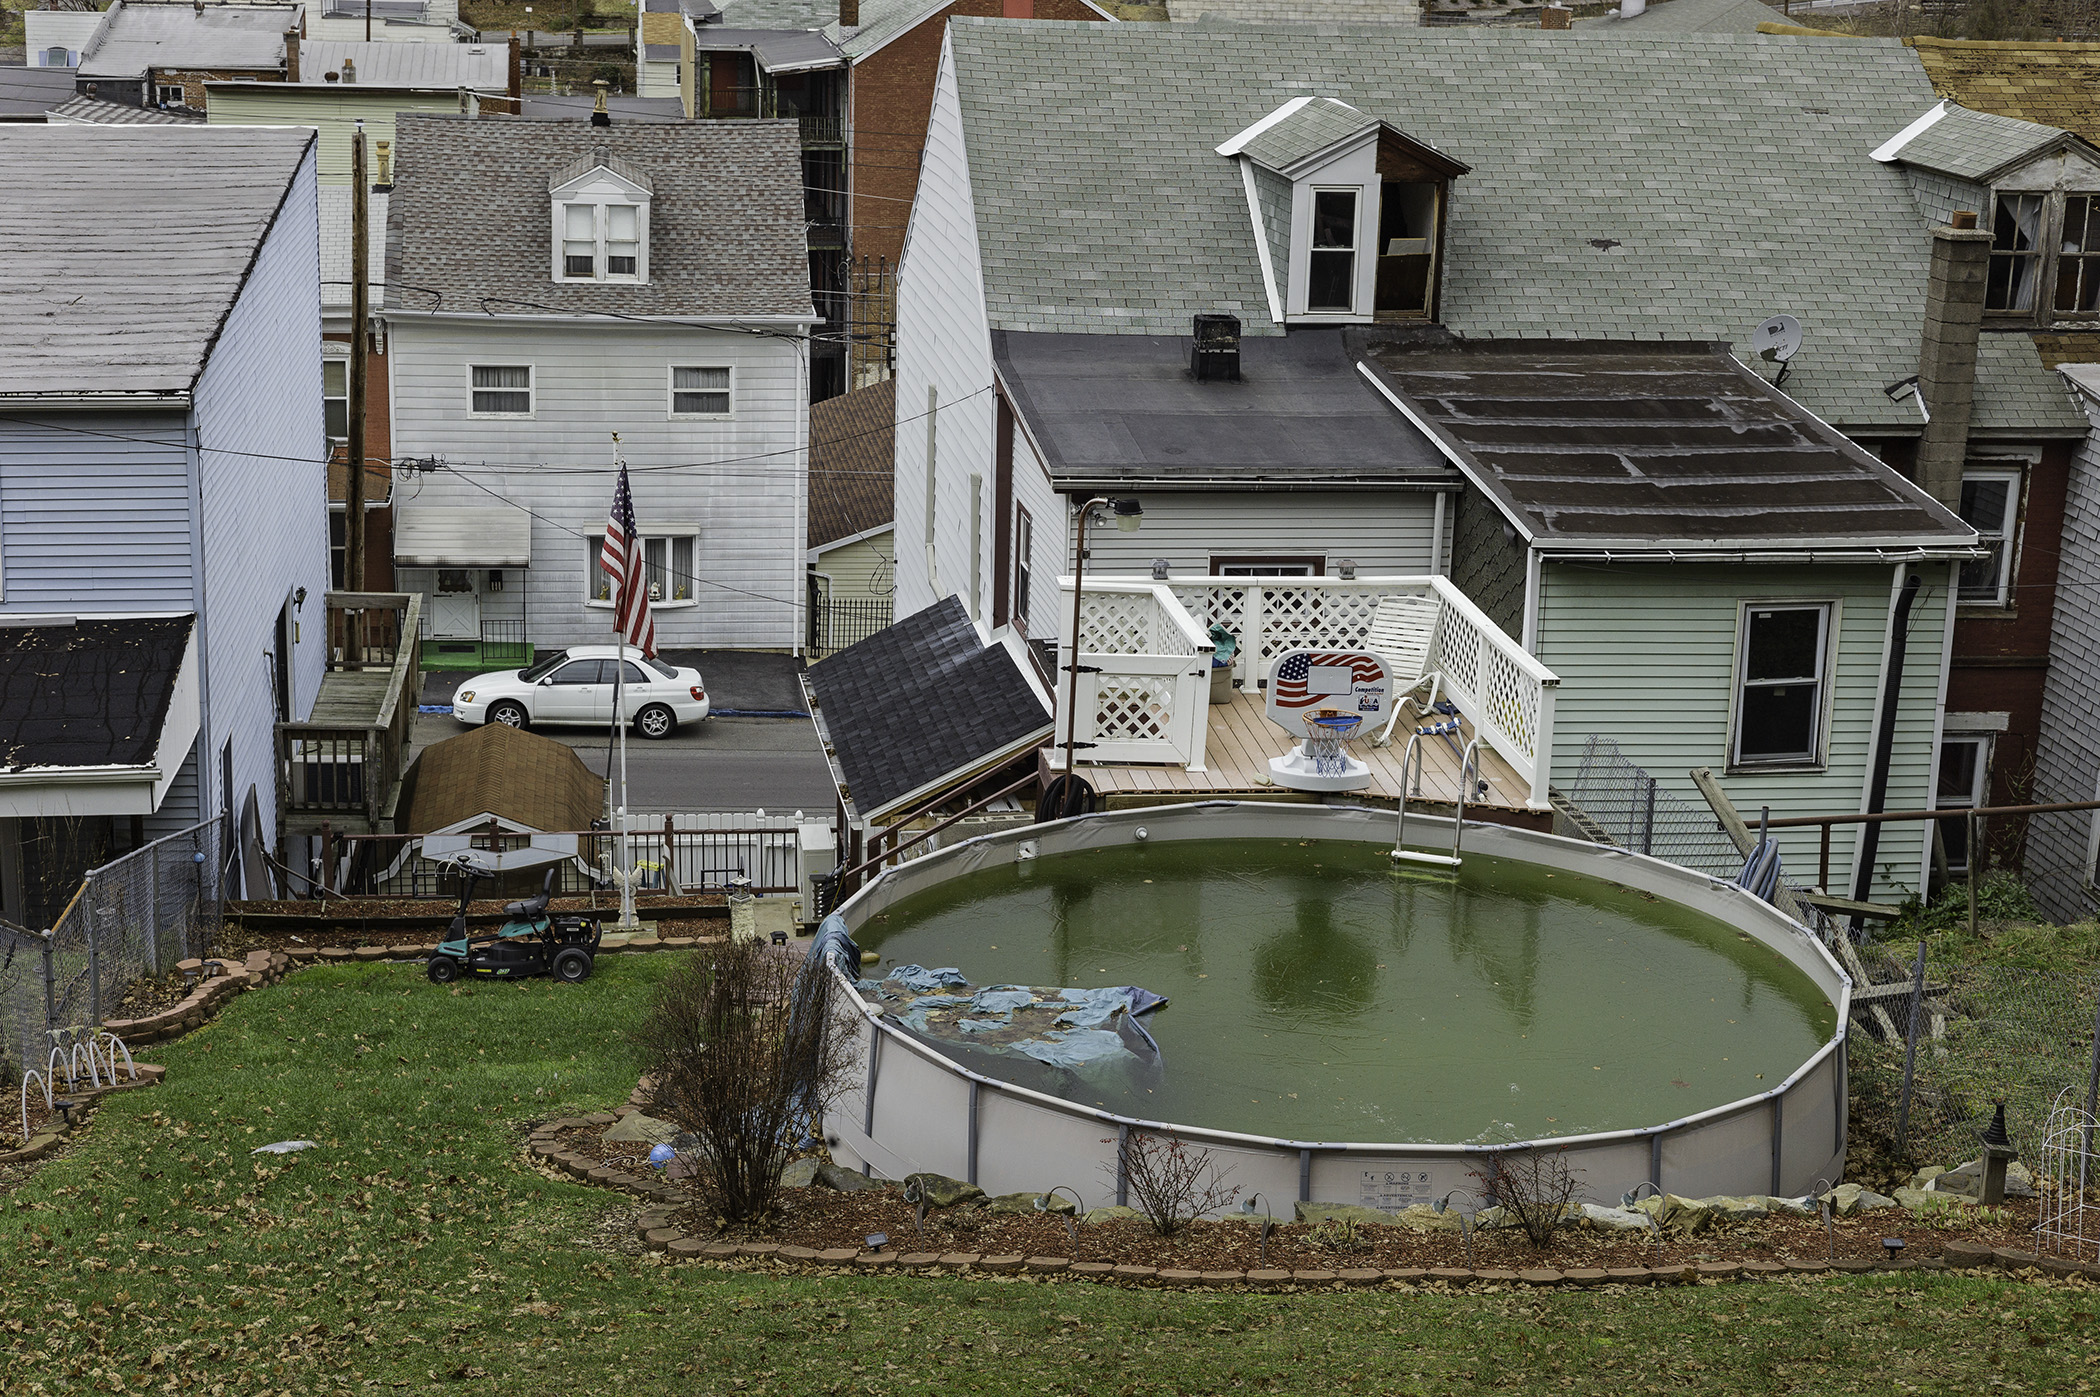 Photograph taken from the top of a hill in a suburban neighborhood, an above-ground backyard pool with green water and a blue fl